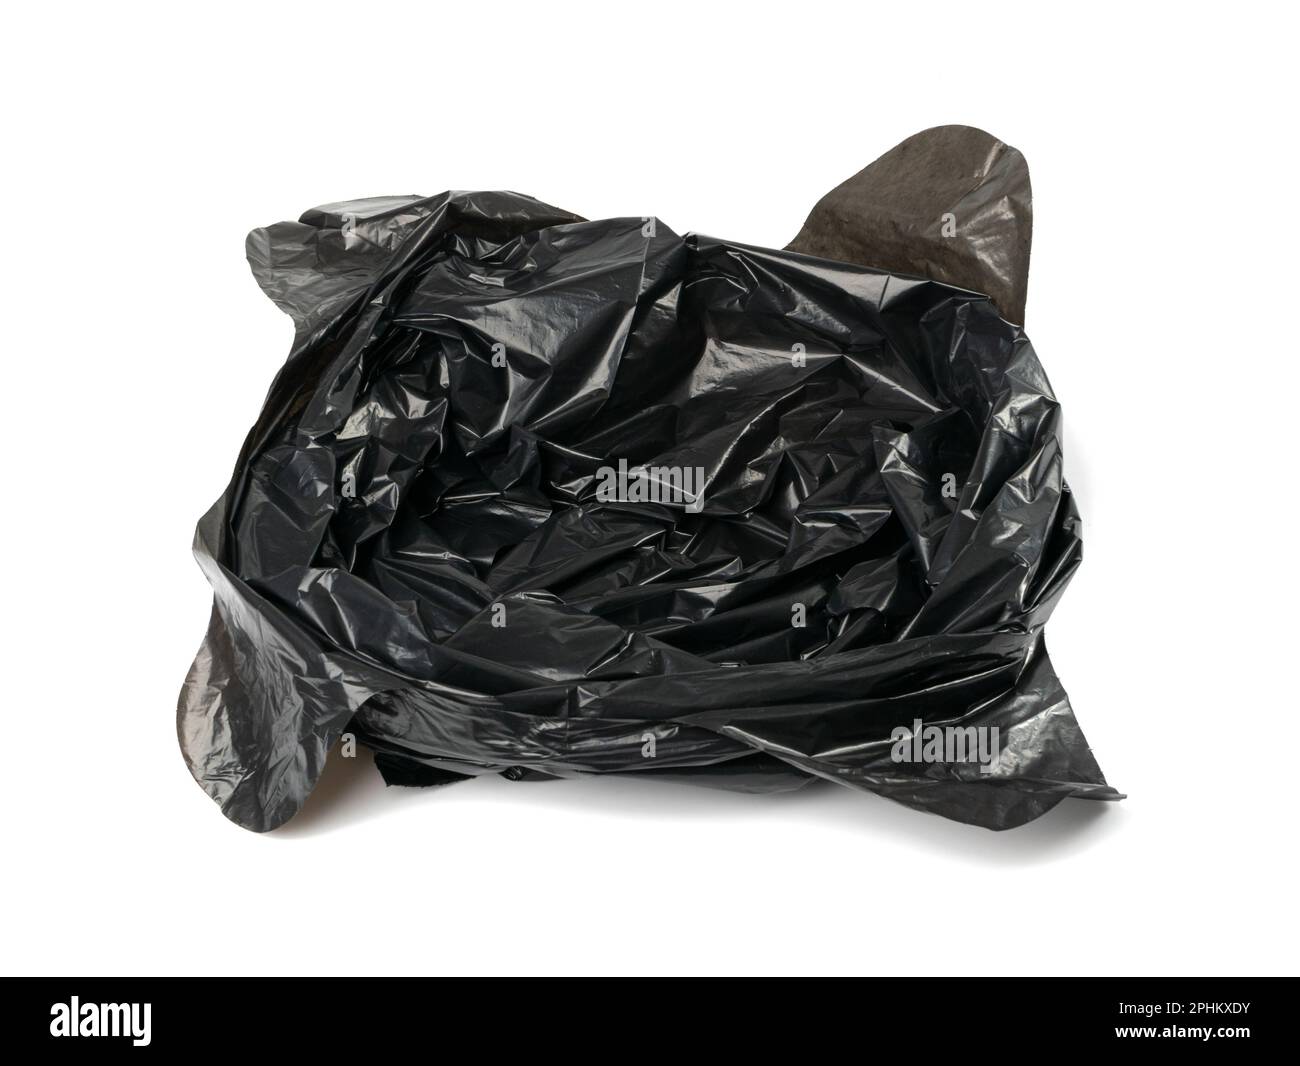 Crumpled Garbage Bag Isolated. Wrinkled Trash Package, Used Plastic Bin Bags, Black Polyethylene Waste Container on White Background Stock Photo